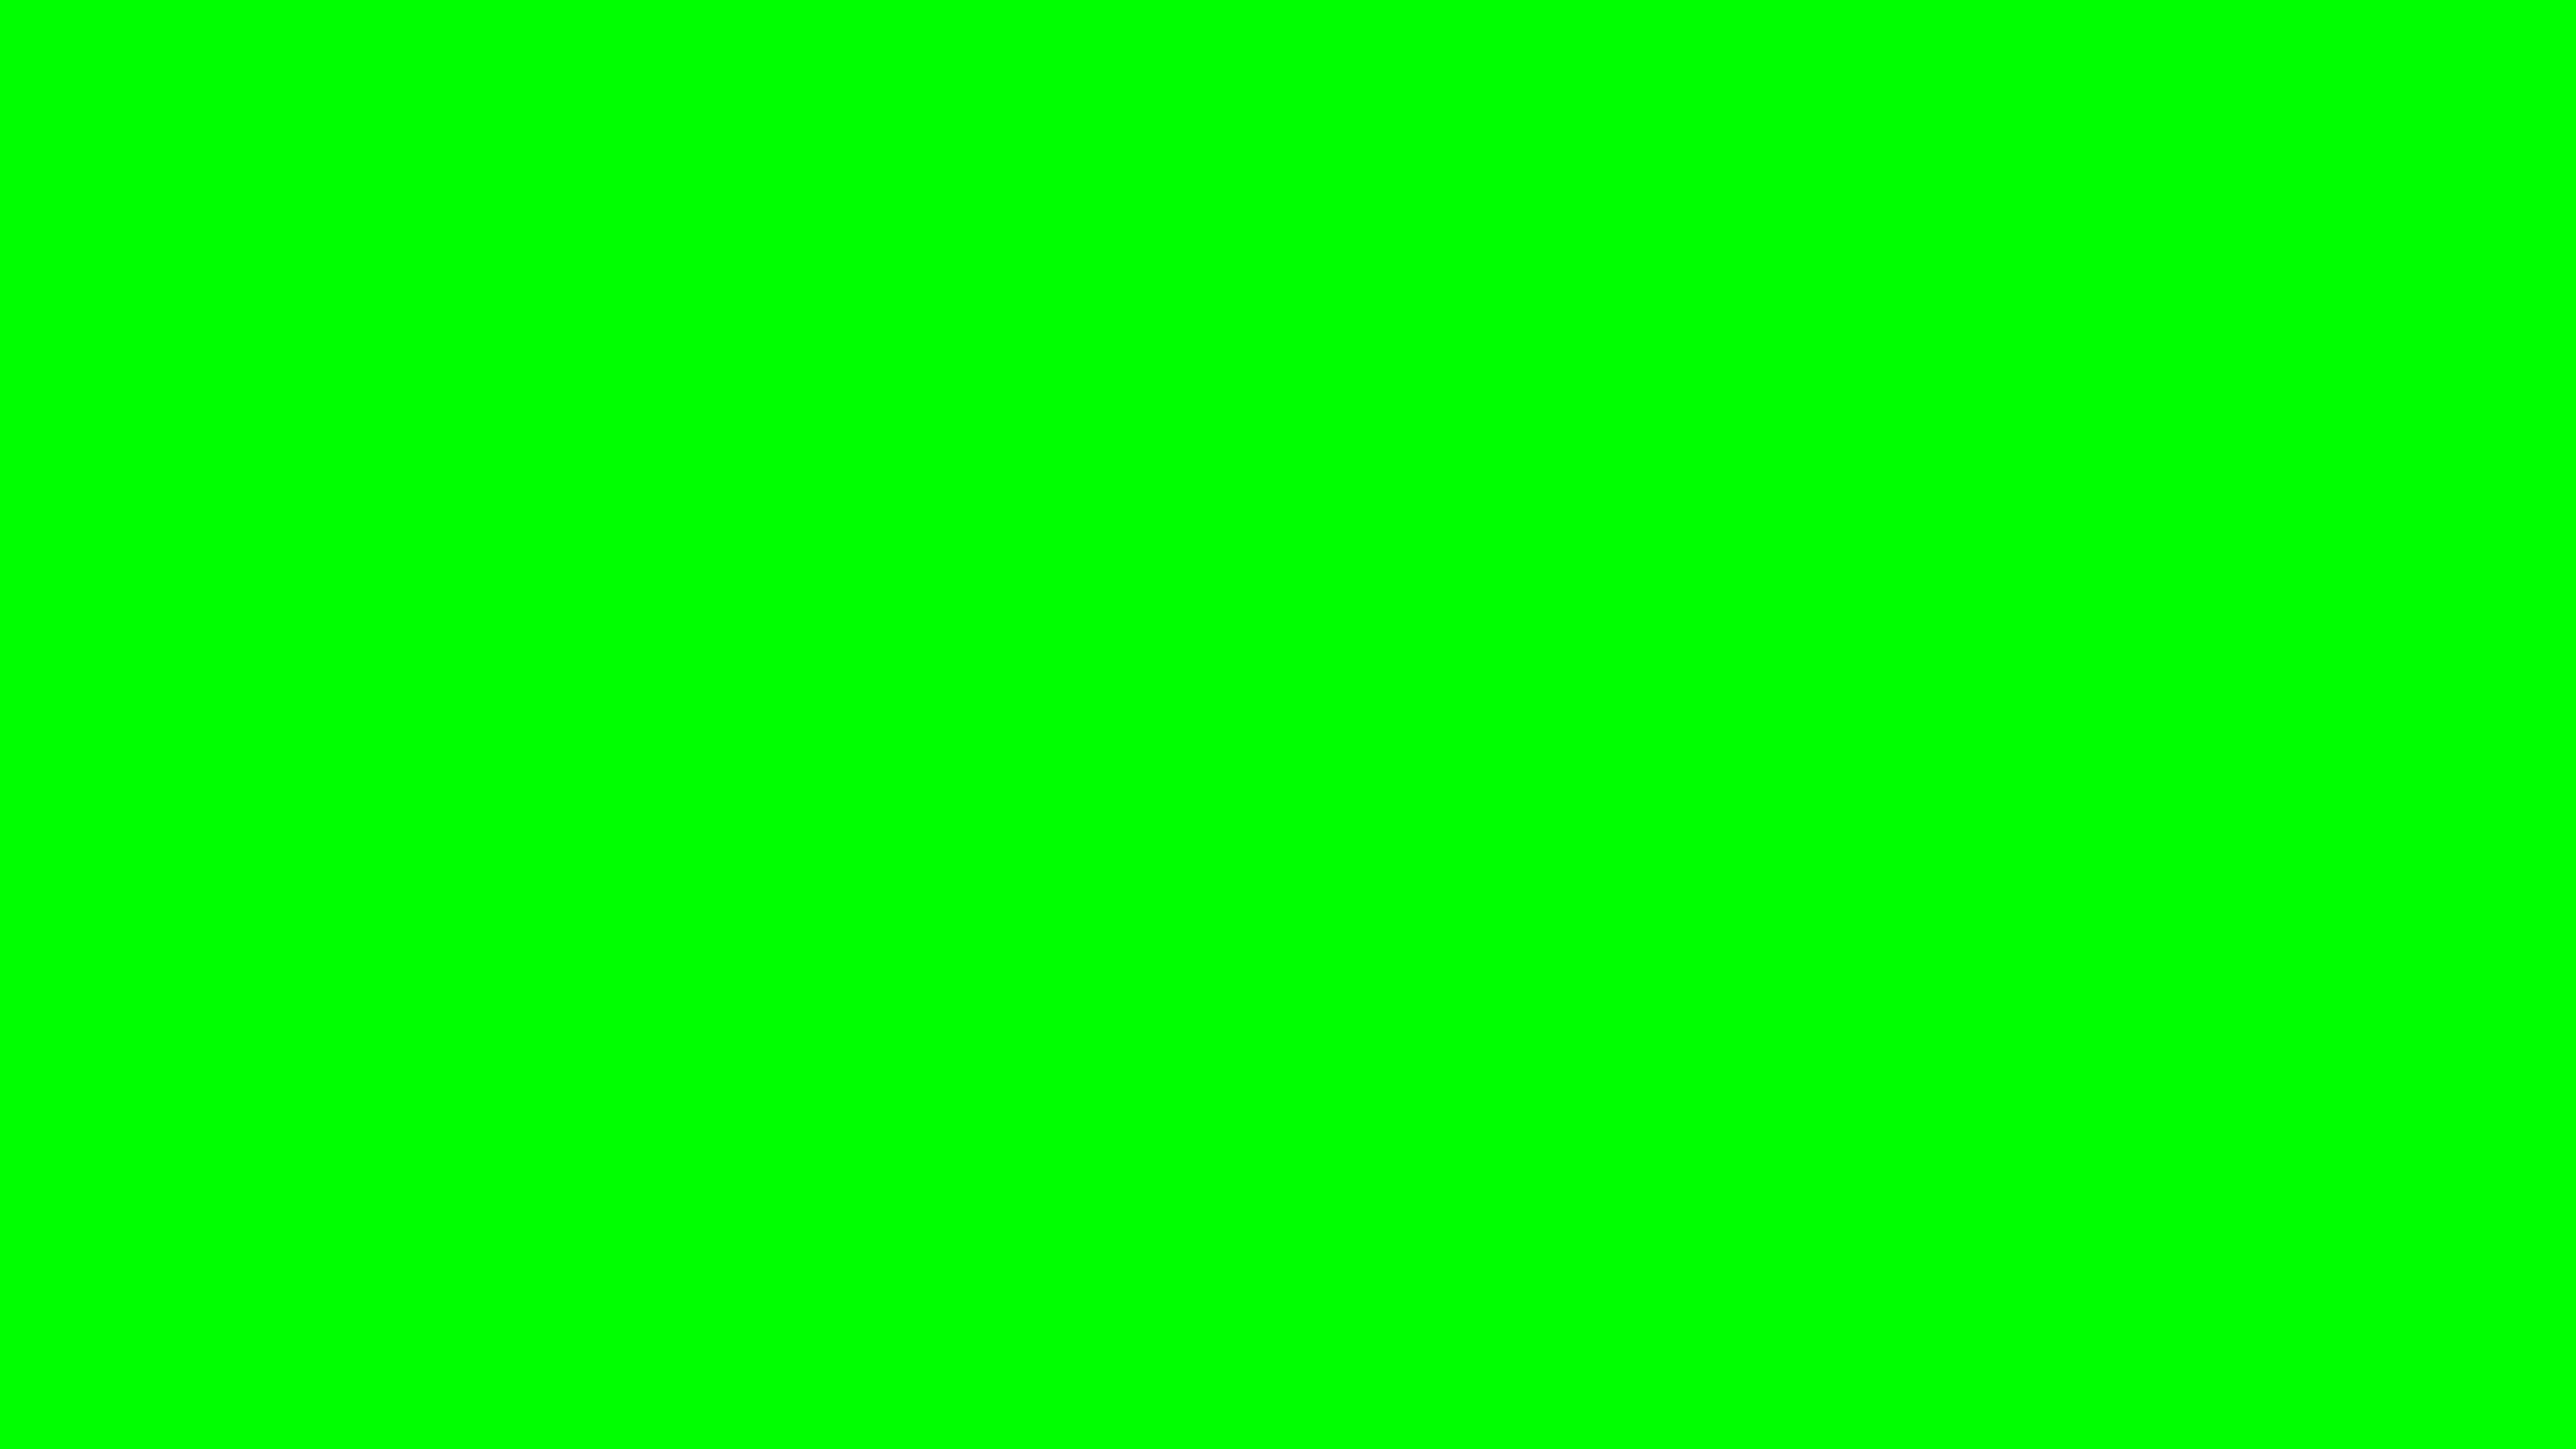 7680x4320 Electric Green Solid Color Background